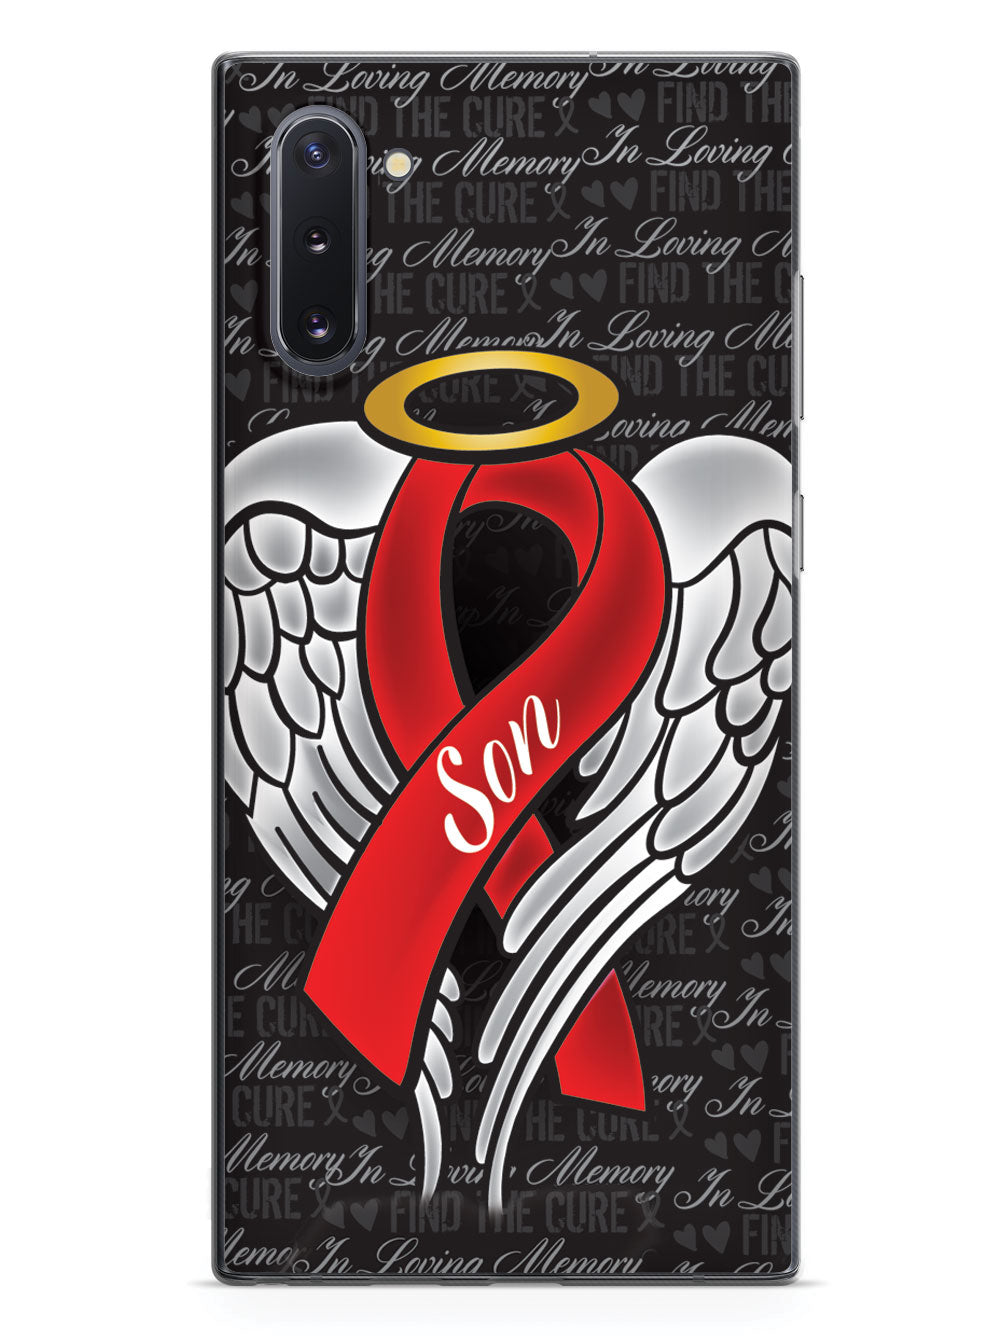 In Loving Memory of My Son - Red Ribbon Case